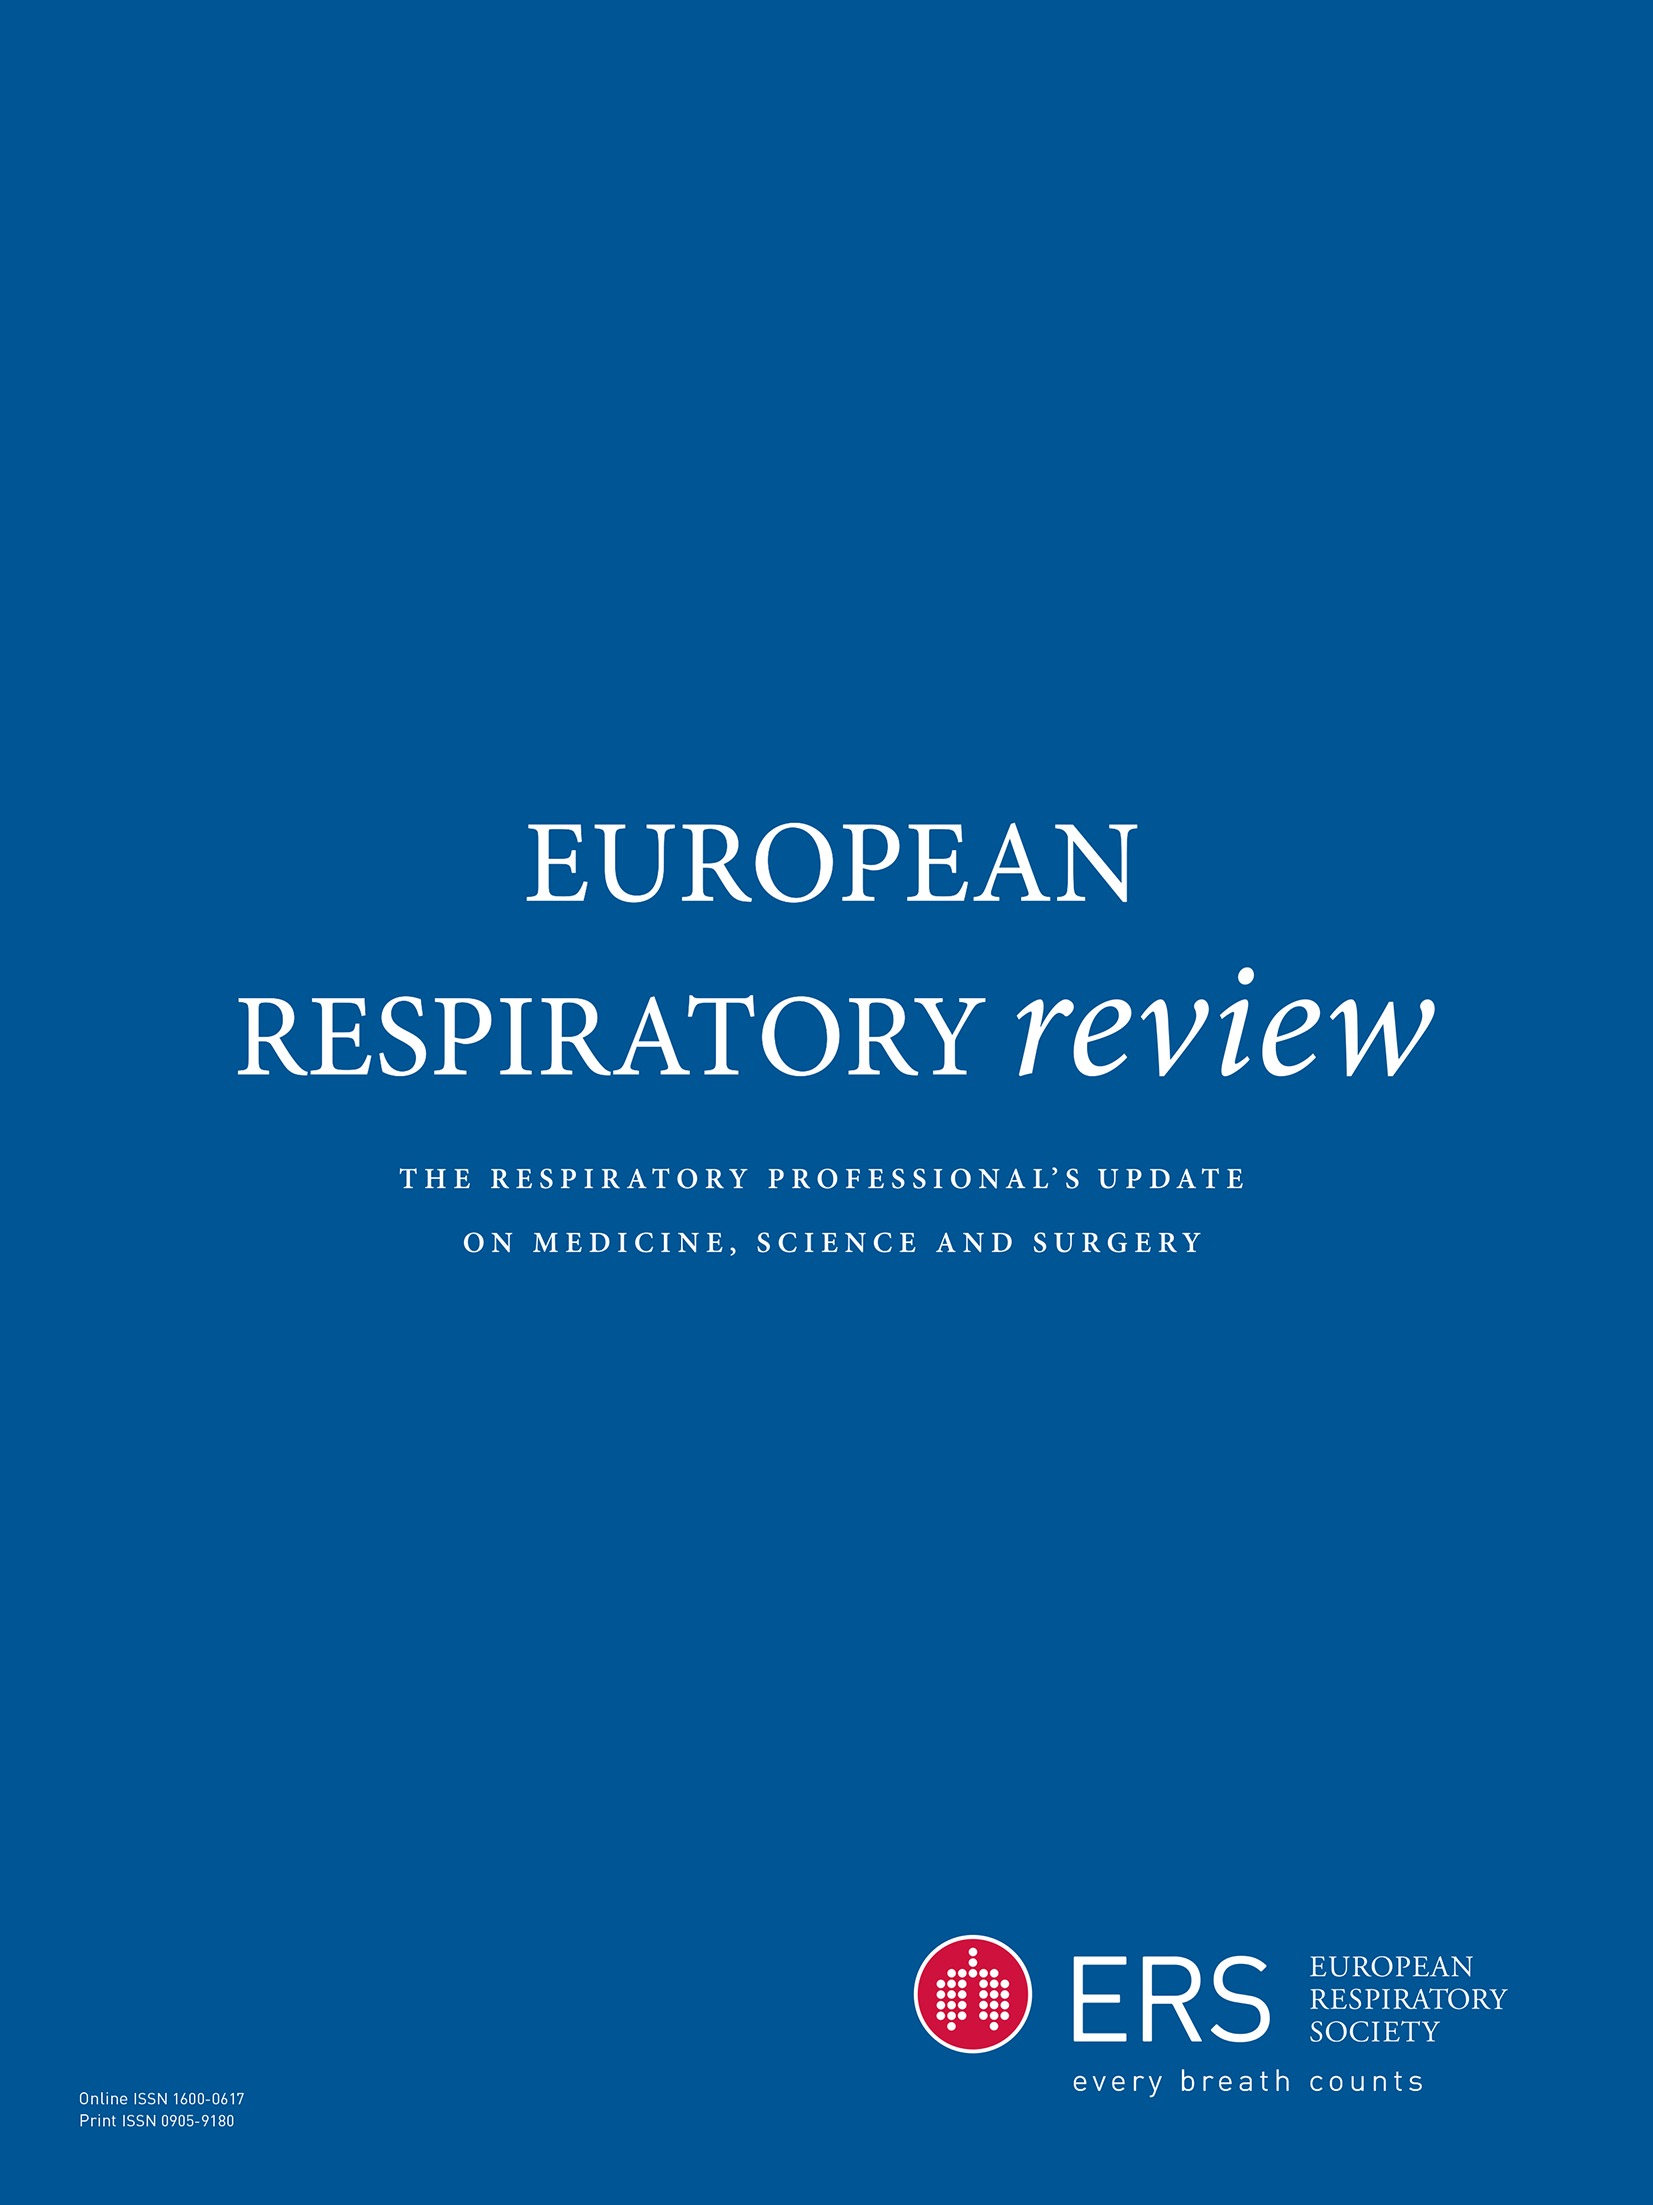 Montelukast in paediatric asthma and allergic rhinitis: a systematic review and meta-analysis